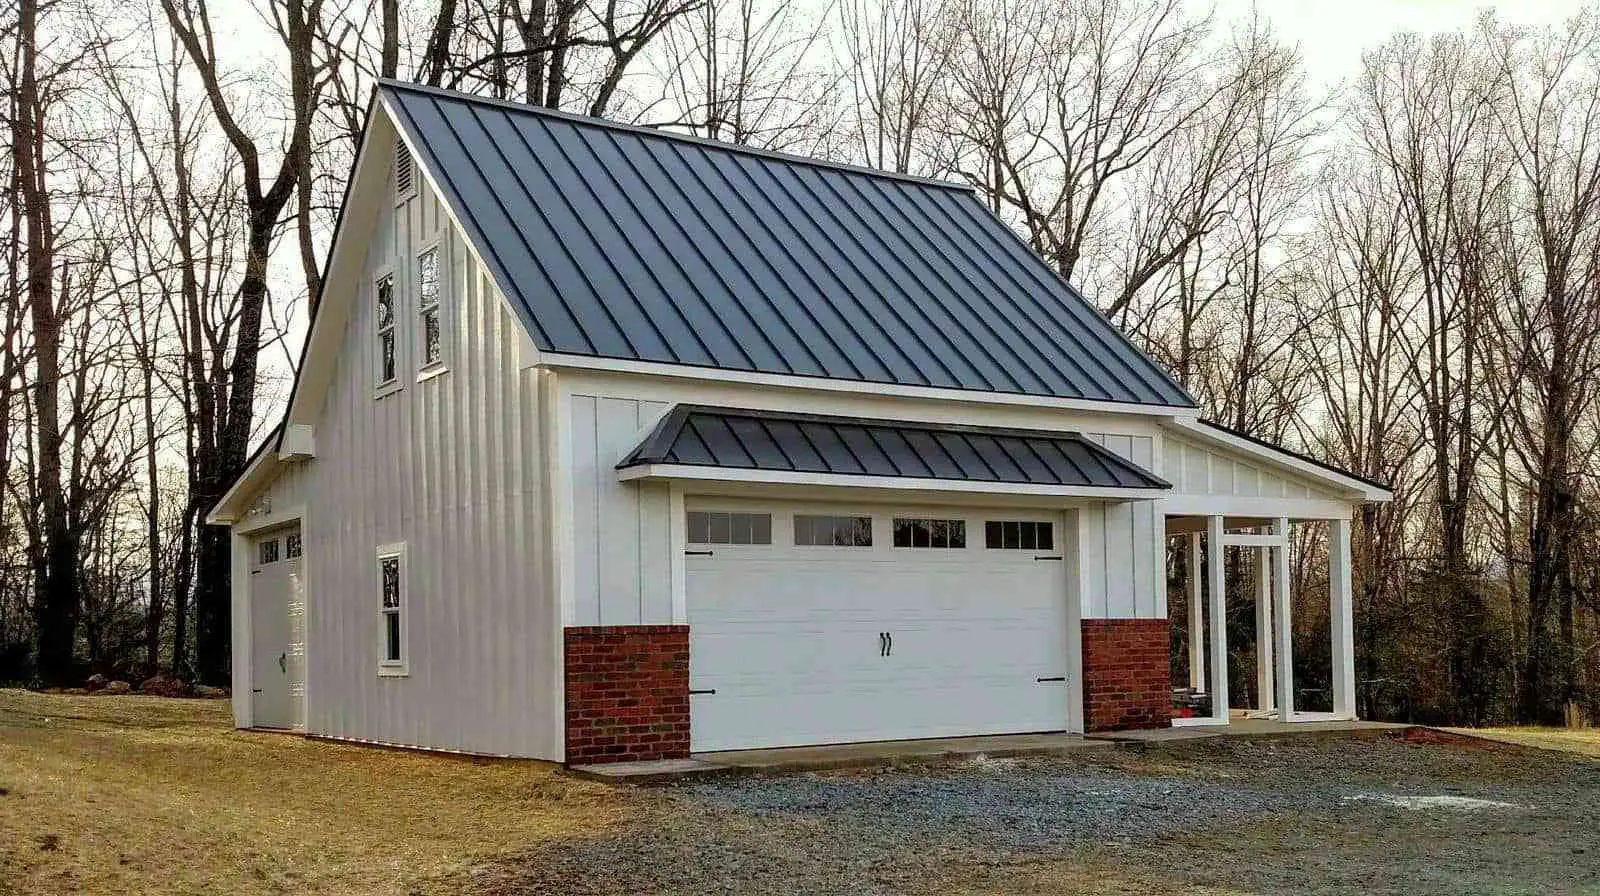 Average Cost of Metal Roof on 1600 Square Foot Homes ...